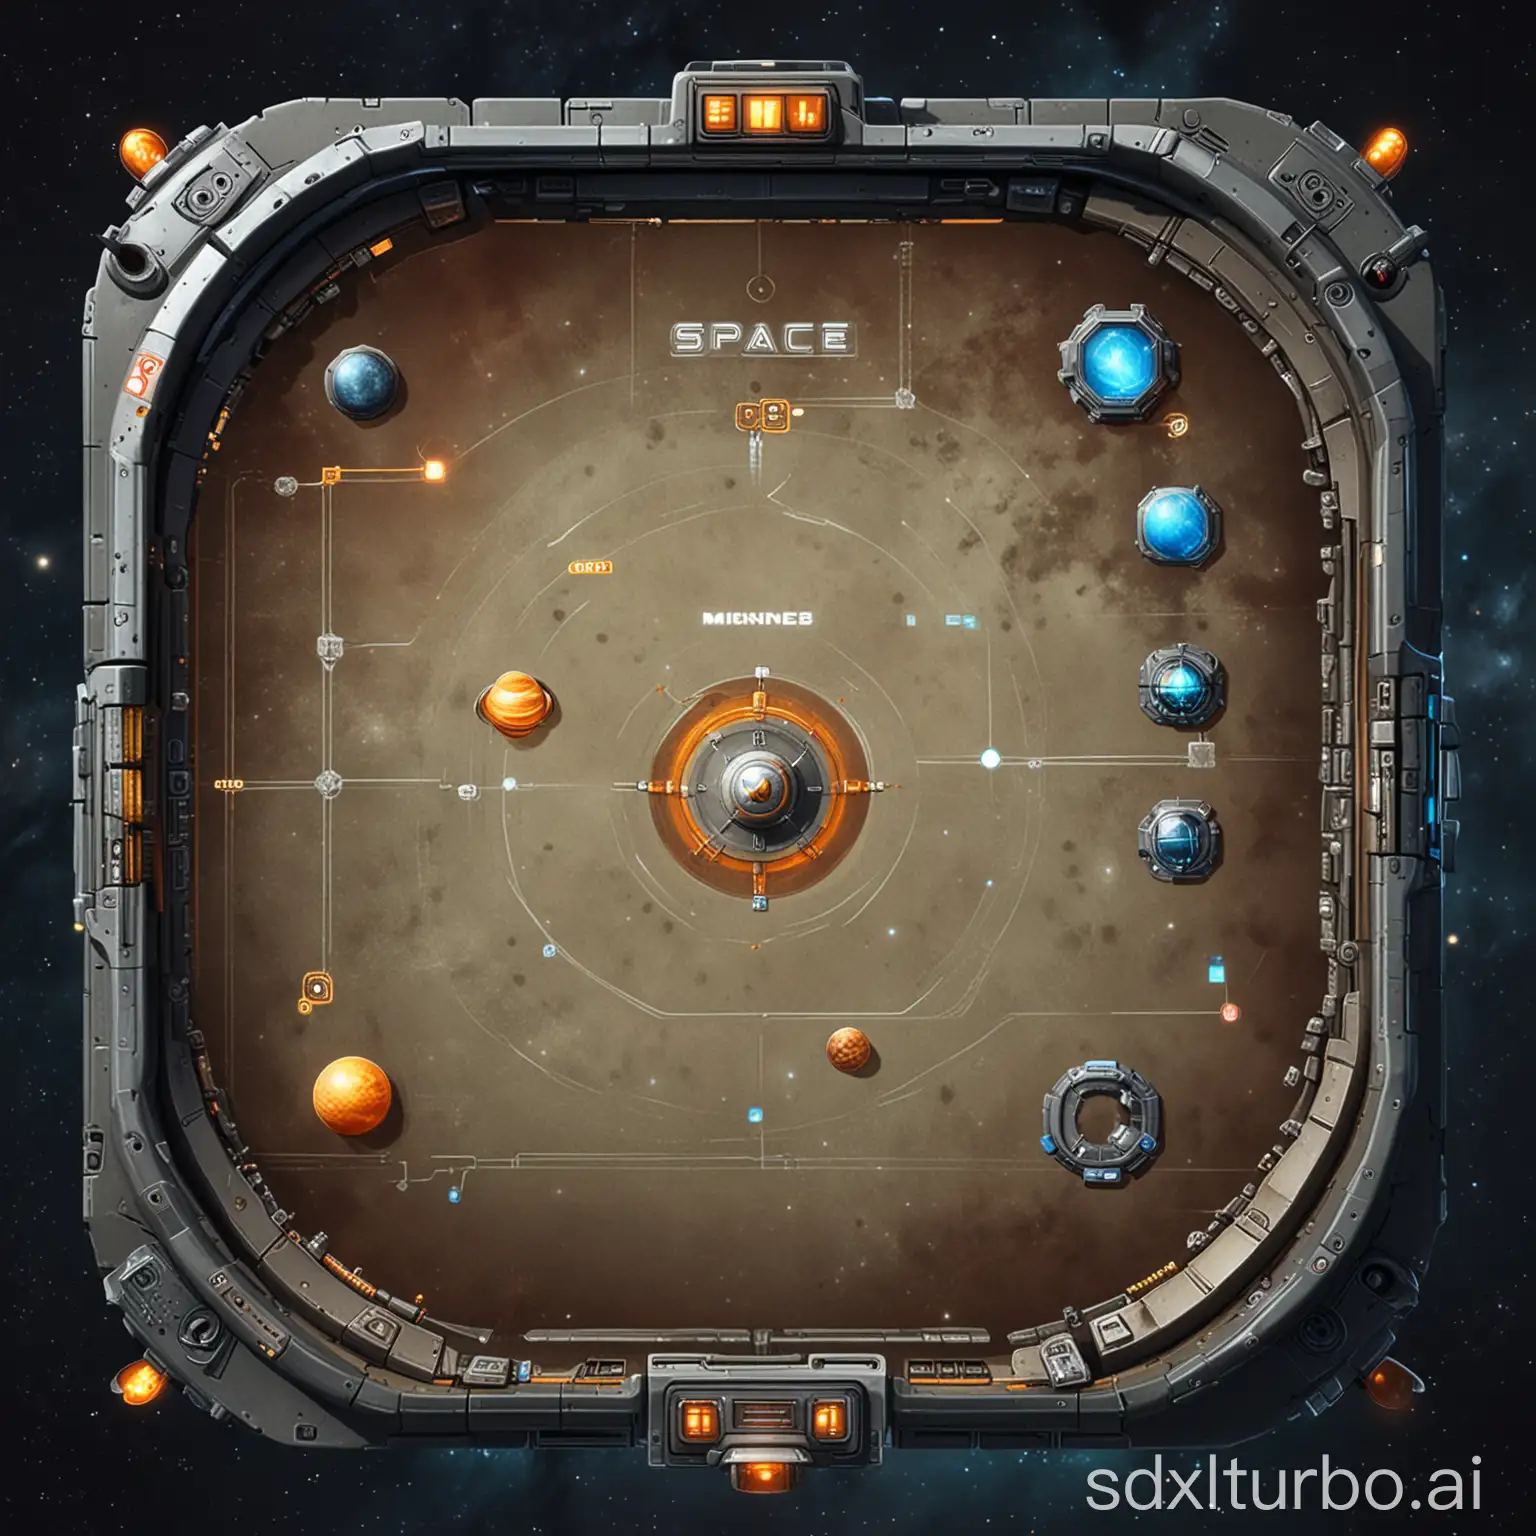 Space-Game-Mini-Map-GUI-Navigation-Tool-for-Interstellar-Exploration